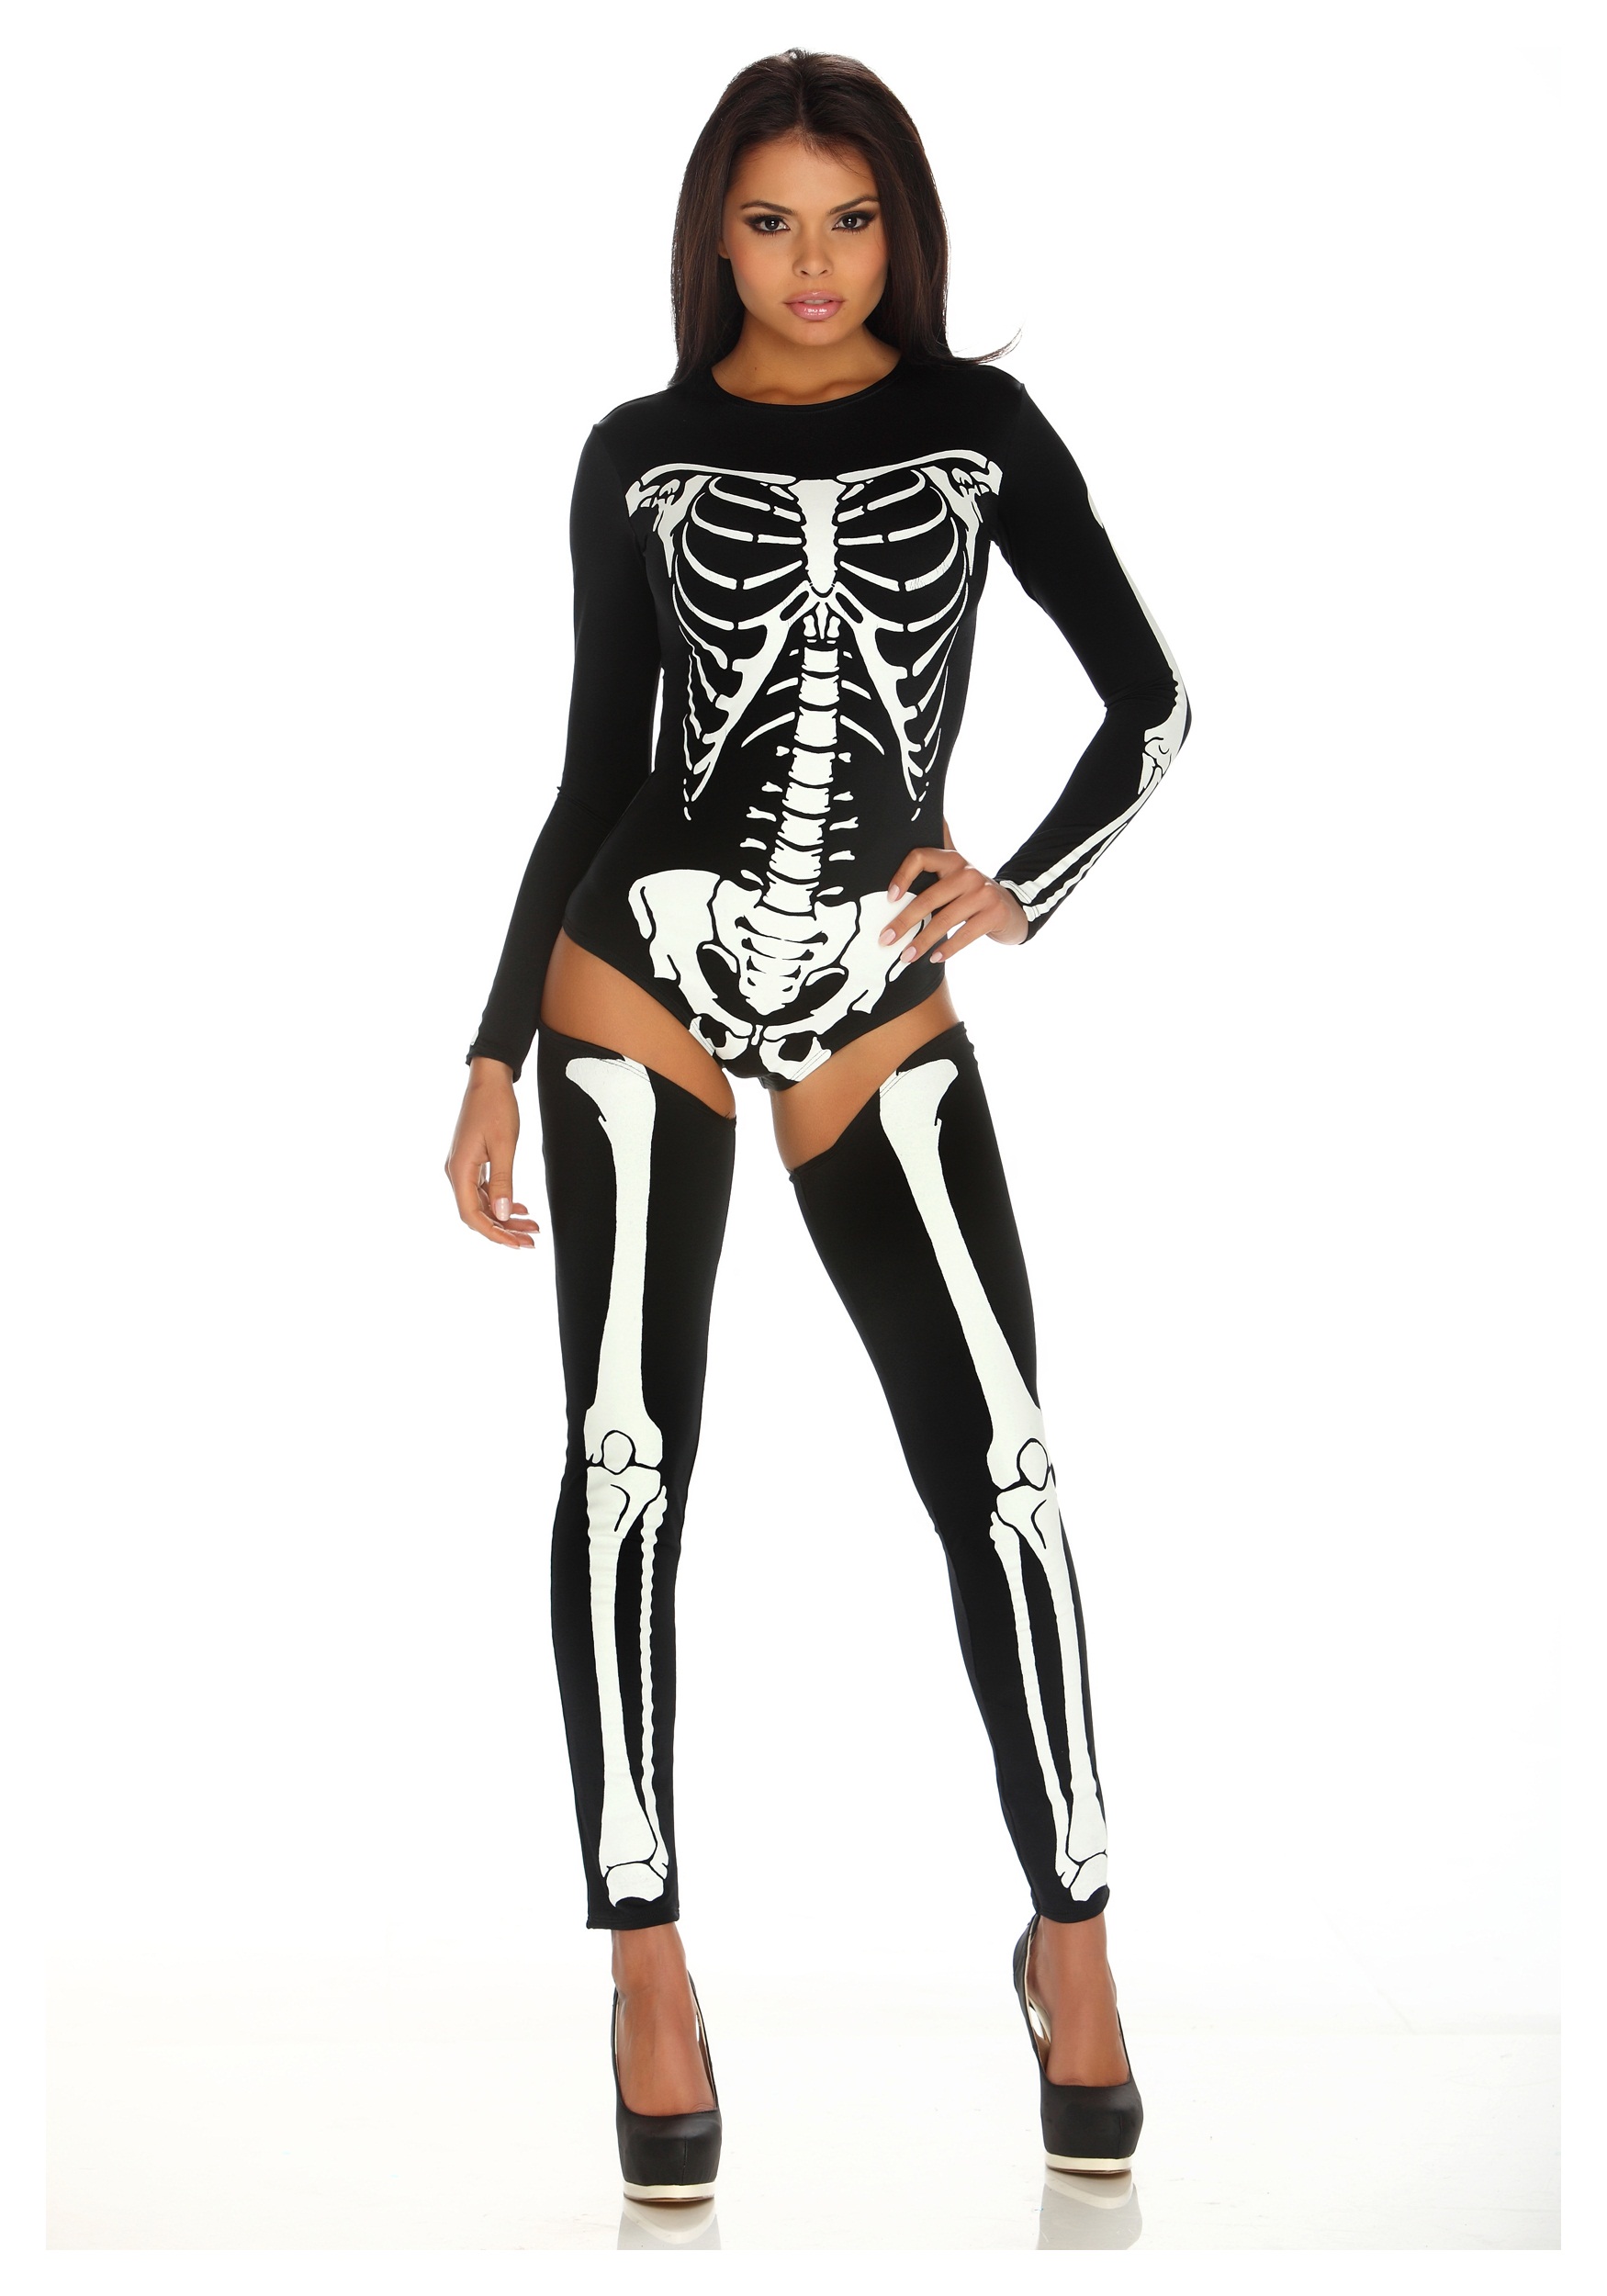 Image of Bad to the Bone Costume for Women ID FP553457-M/L